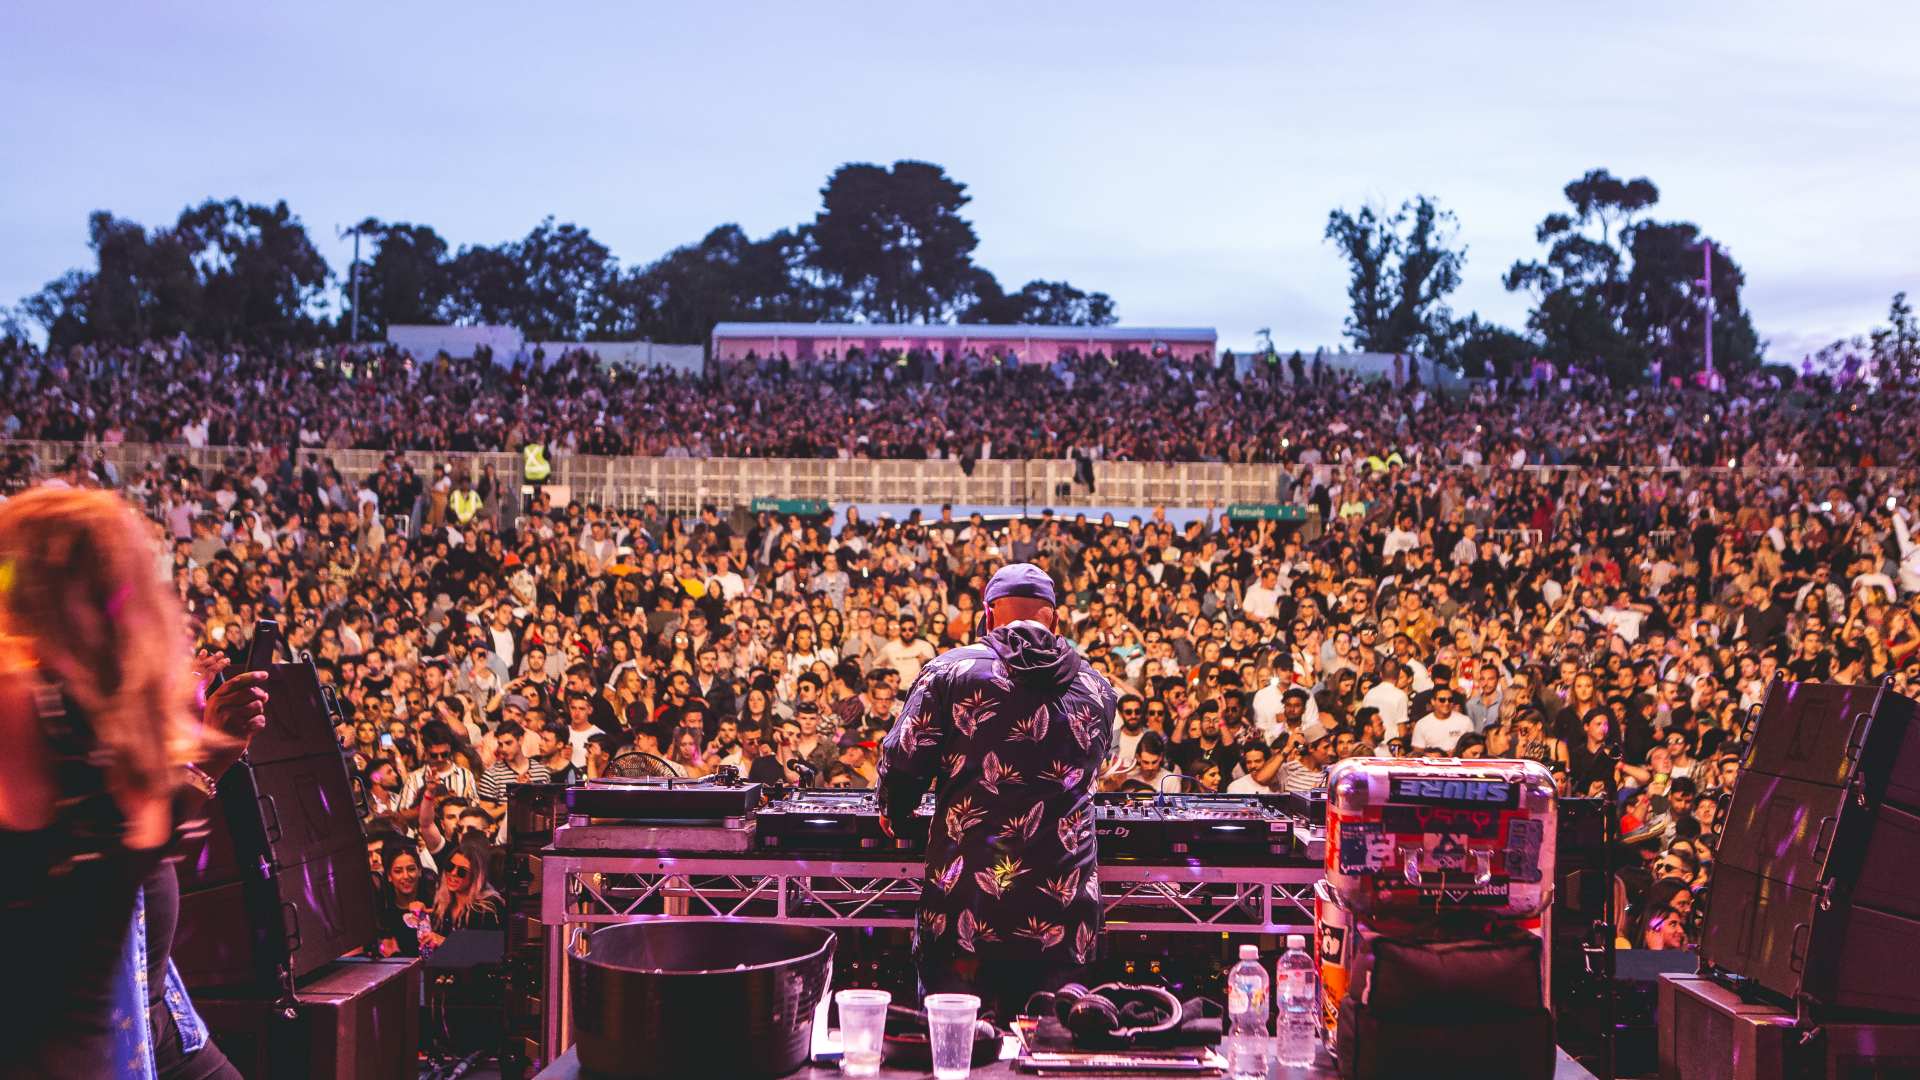 Falls Festival's Next Victorian Edition Will Take Over Sidney Myer Music Bowl This December